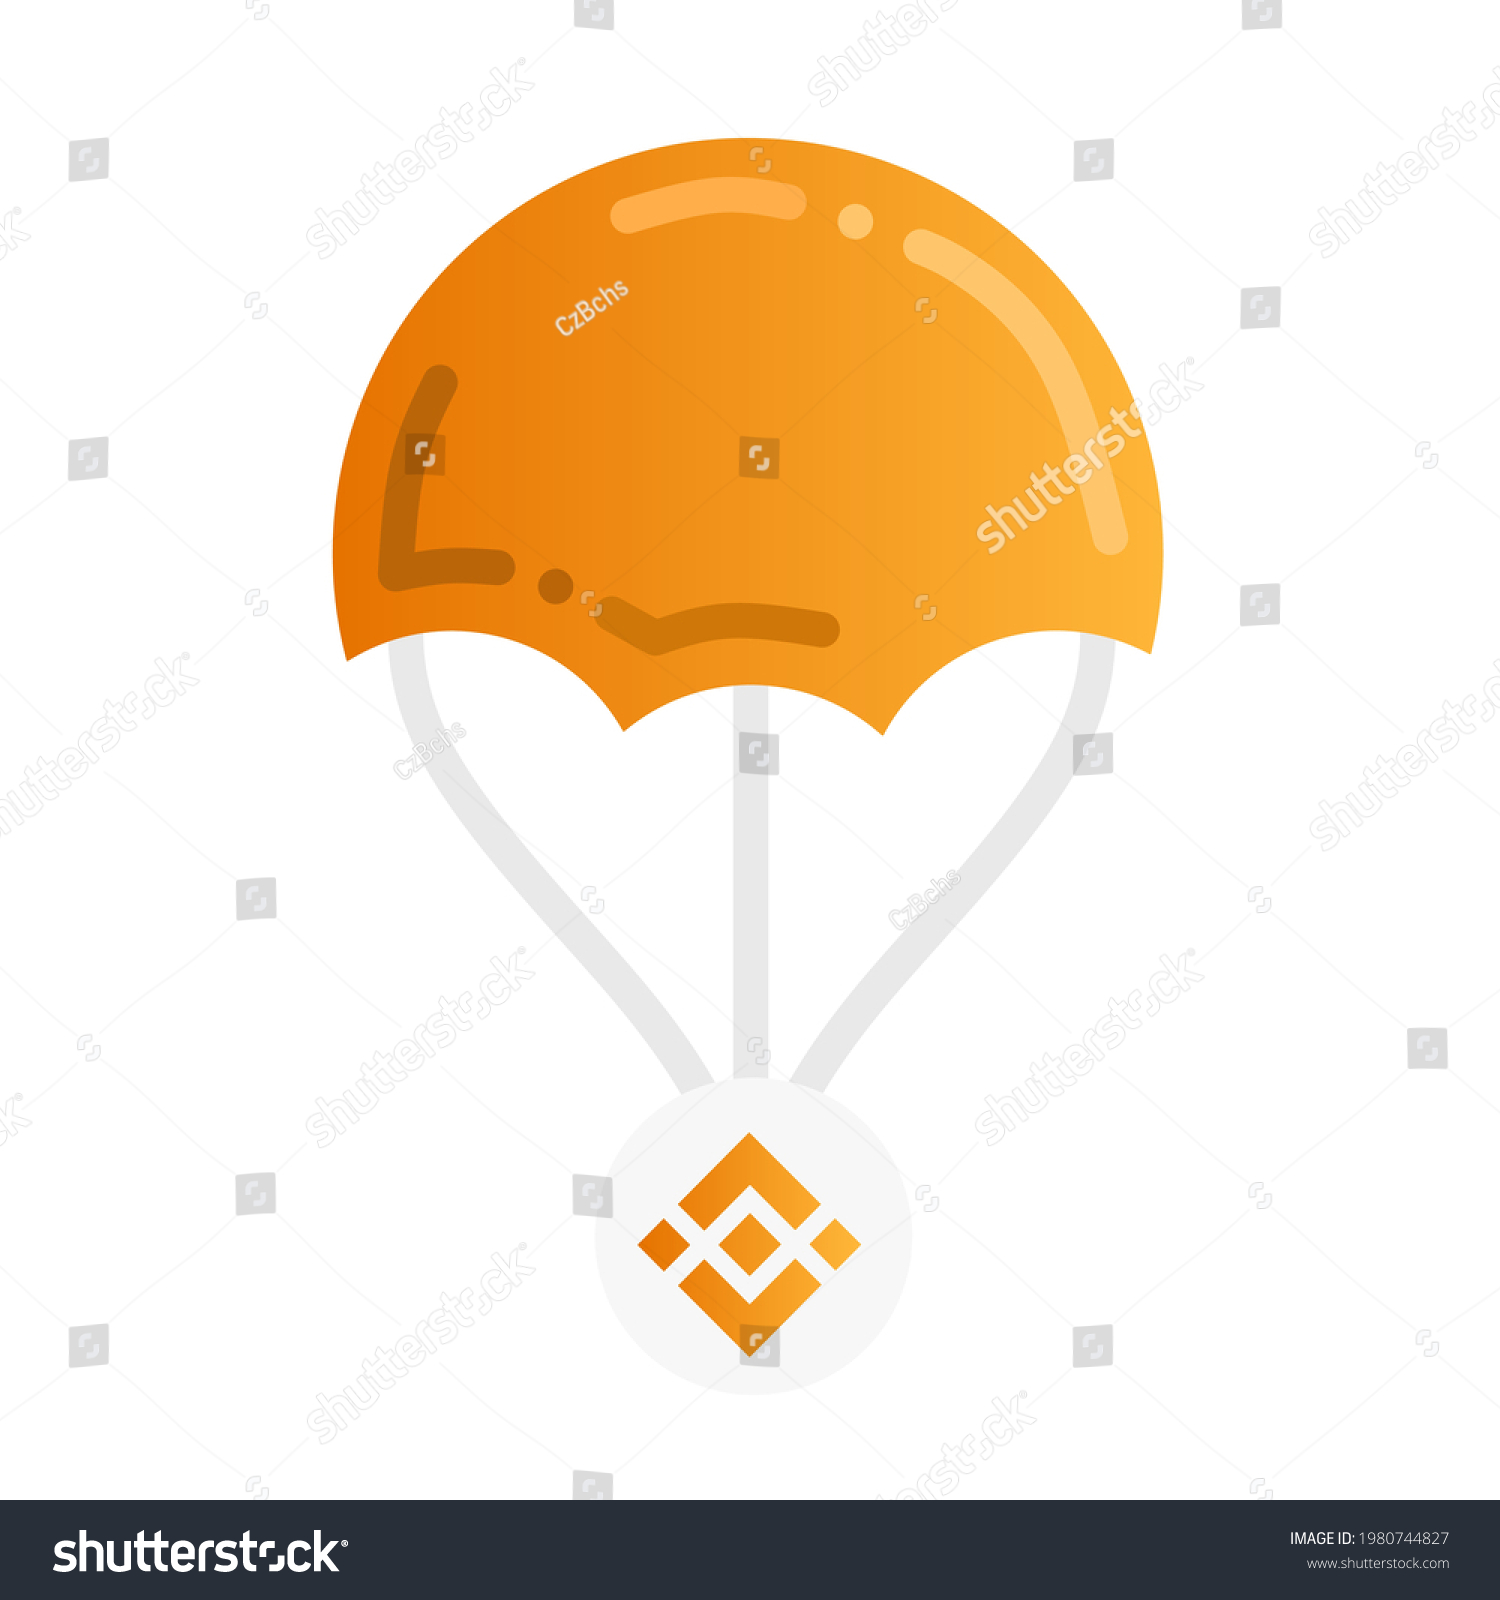 SVG of Crypto airdrop with the binance smart chain network, bsc.  with a parachute illustration and a coin icon.  Illustrations for airdrops, cryptocurrencies, prizes.  Minimalist flat design vector eps10. svg